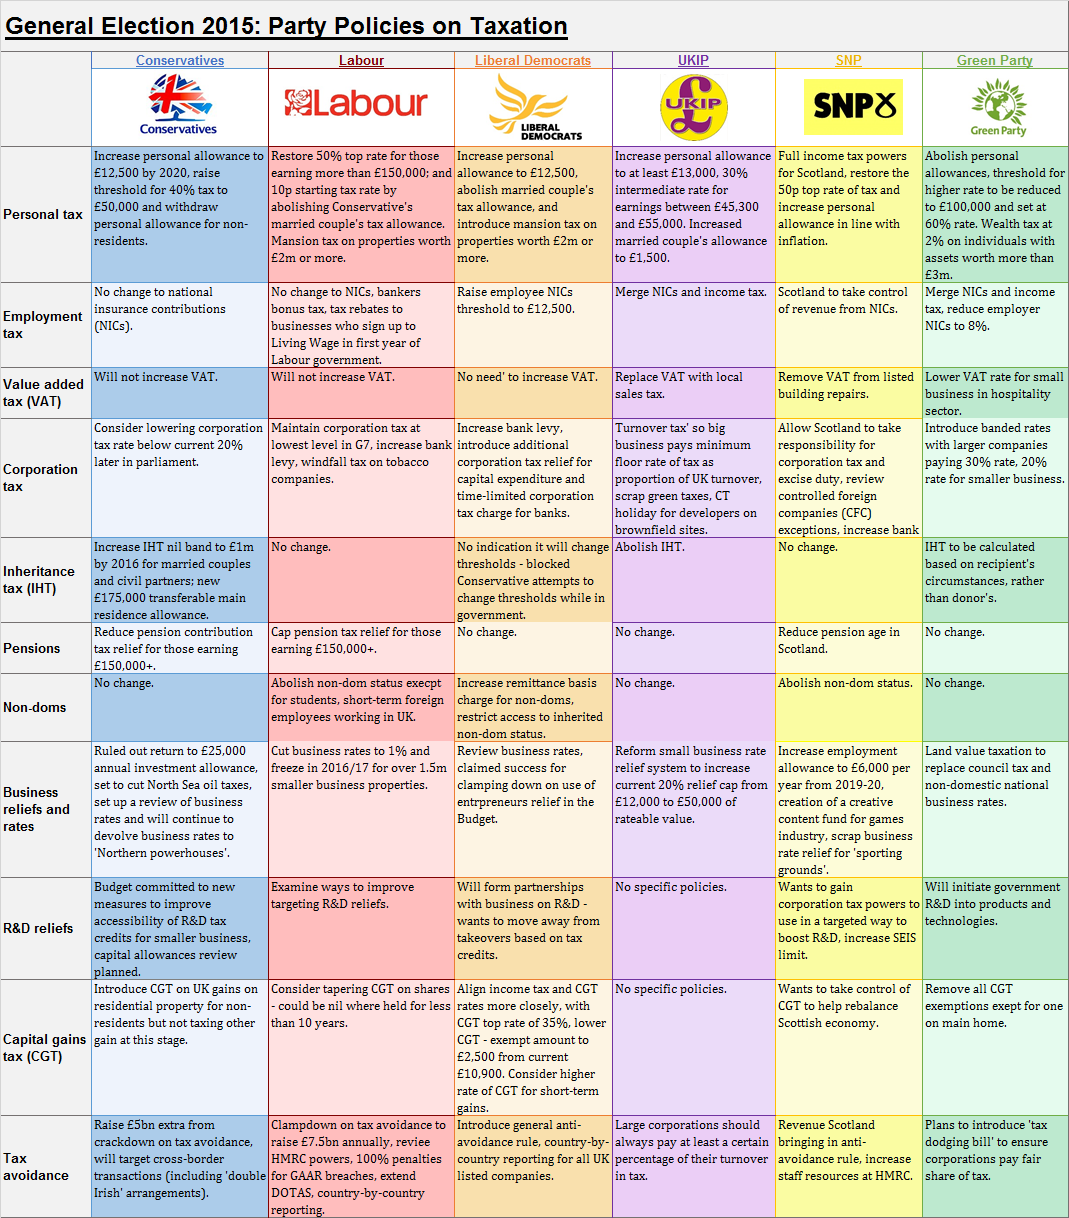 generalelection15table1.2